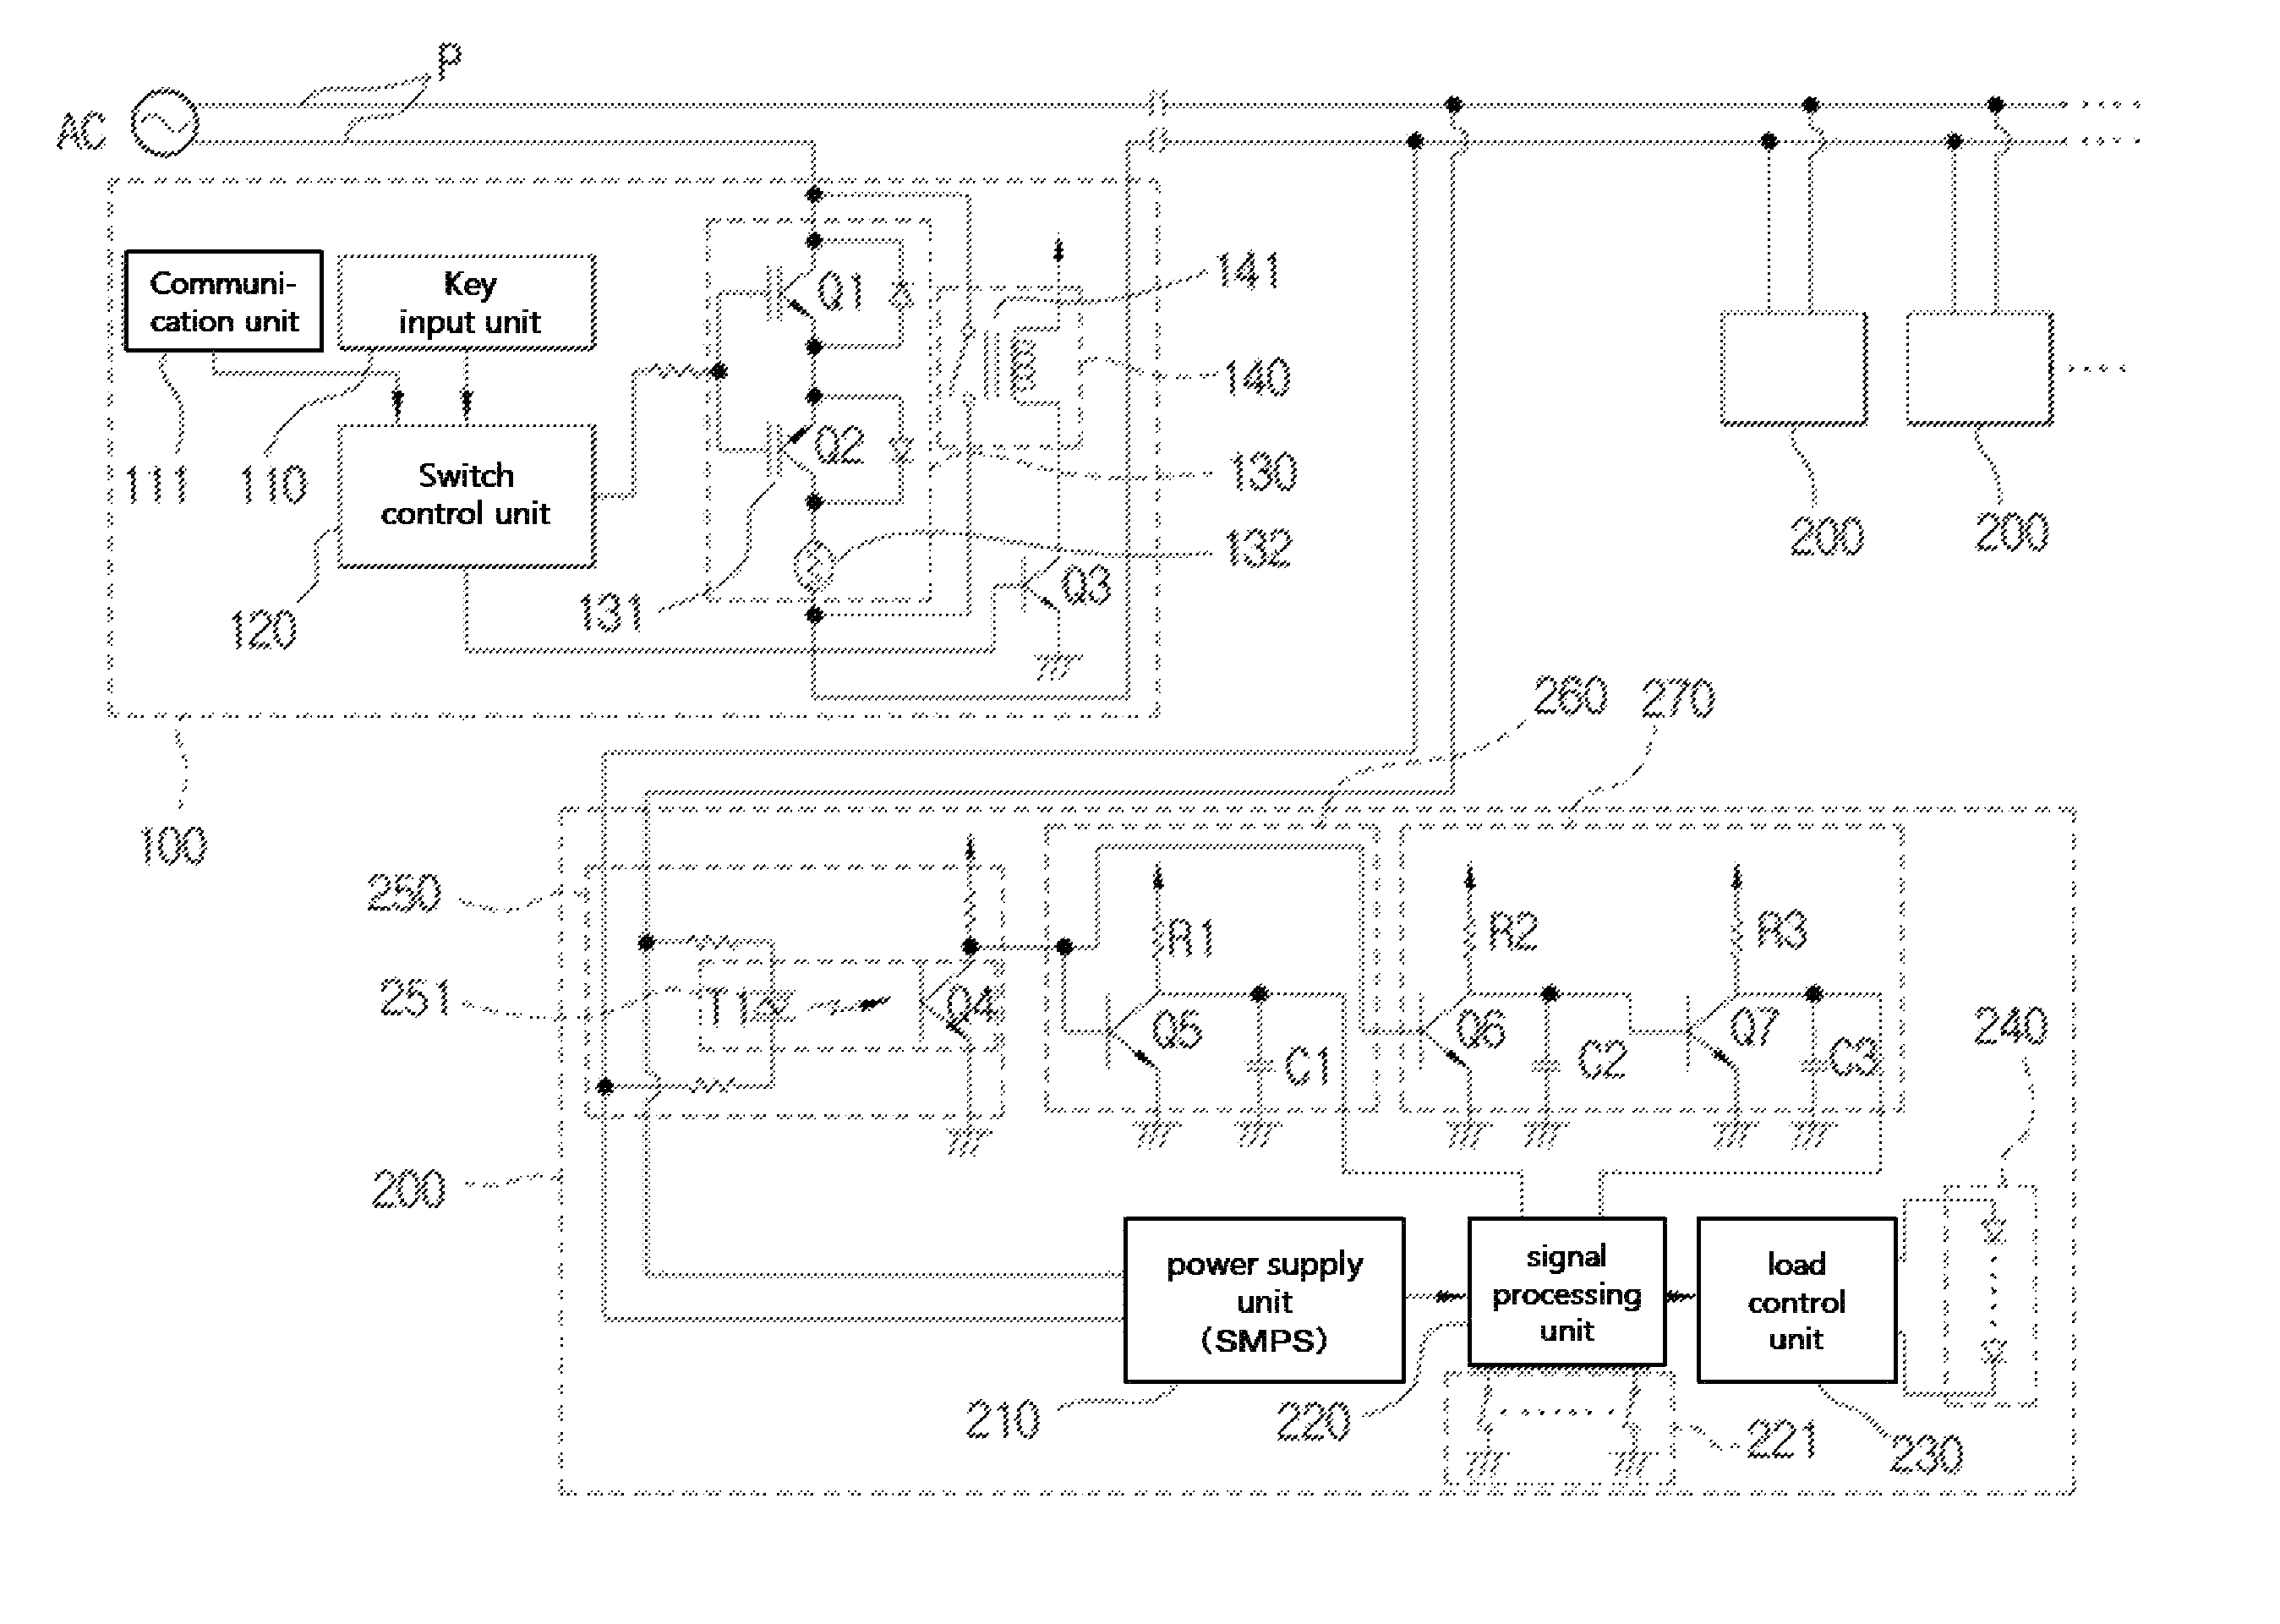 Closed-circuit power line communication system for large capacity load